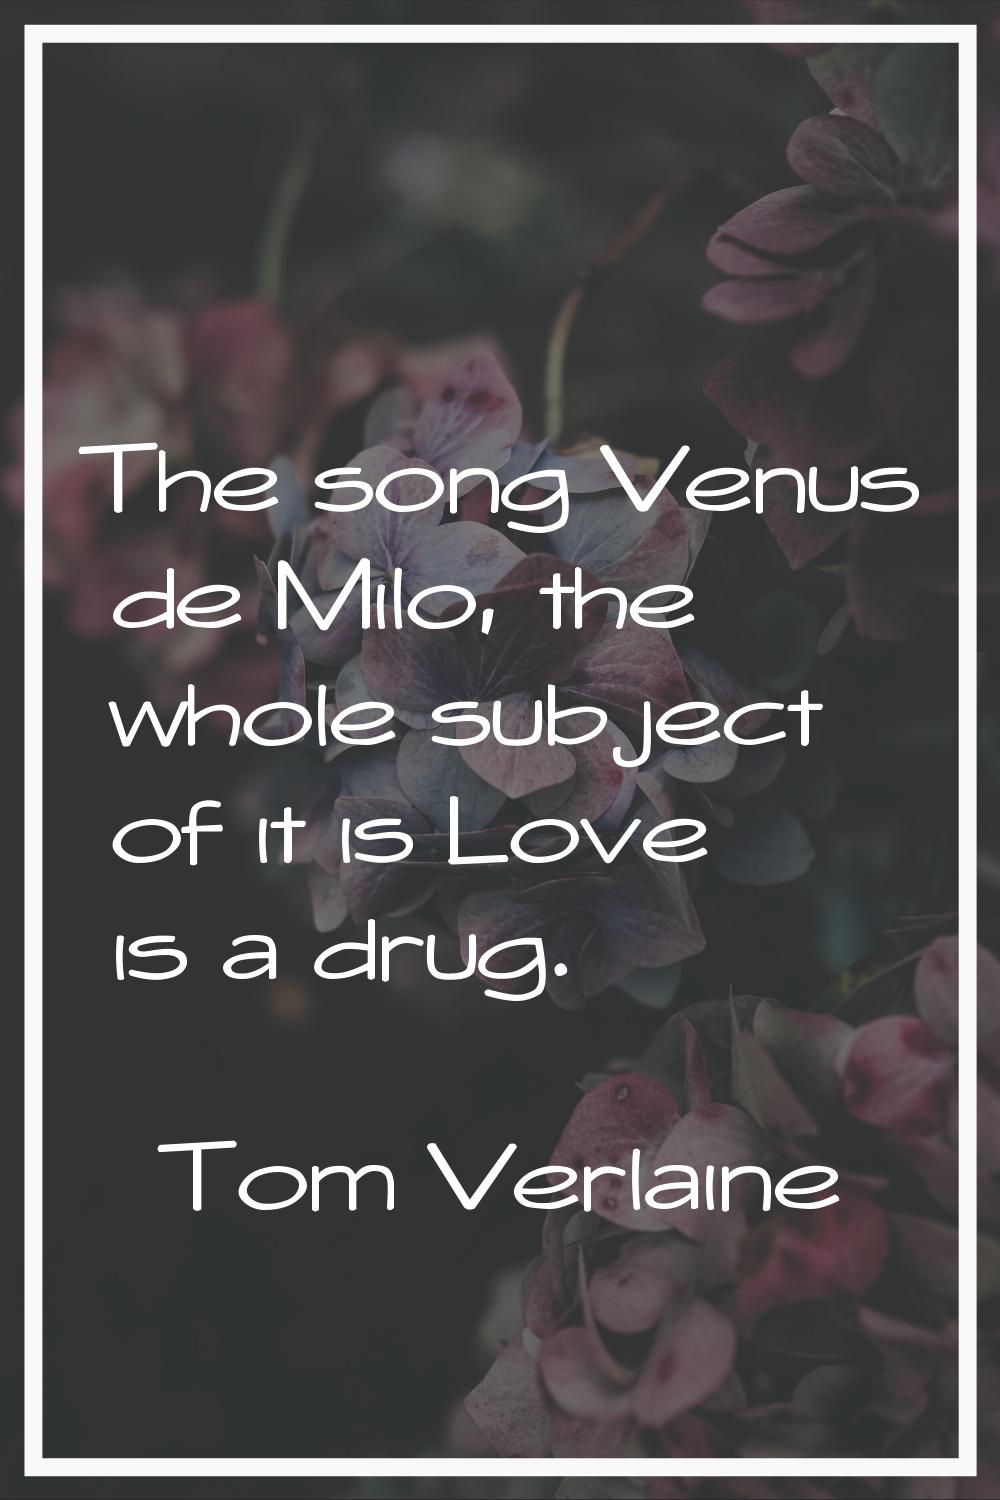 The song Venus de Milo, the whole subject of it is Love is a drug.